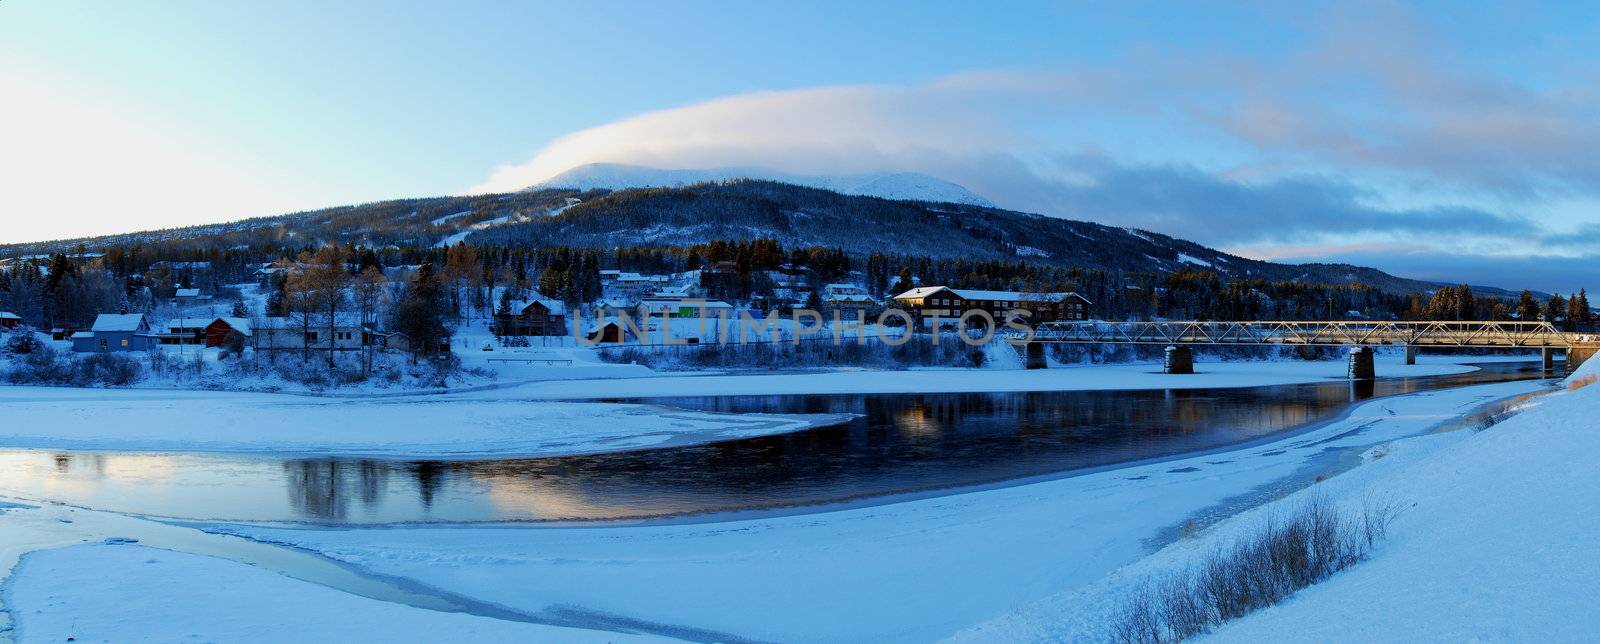 Evening view the bridge across the river and mountain. Winter in Trysil.